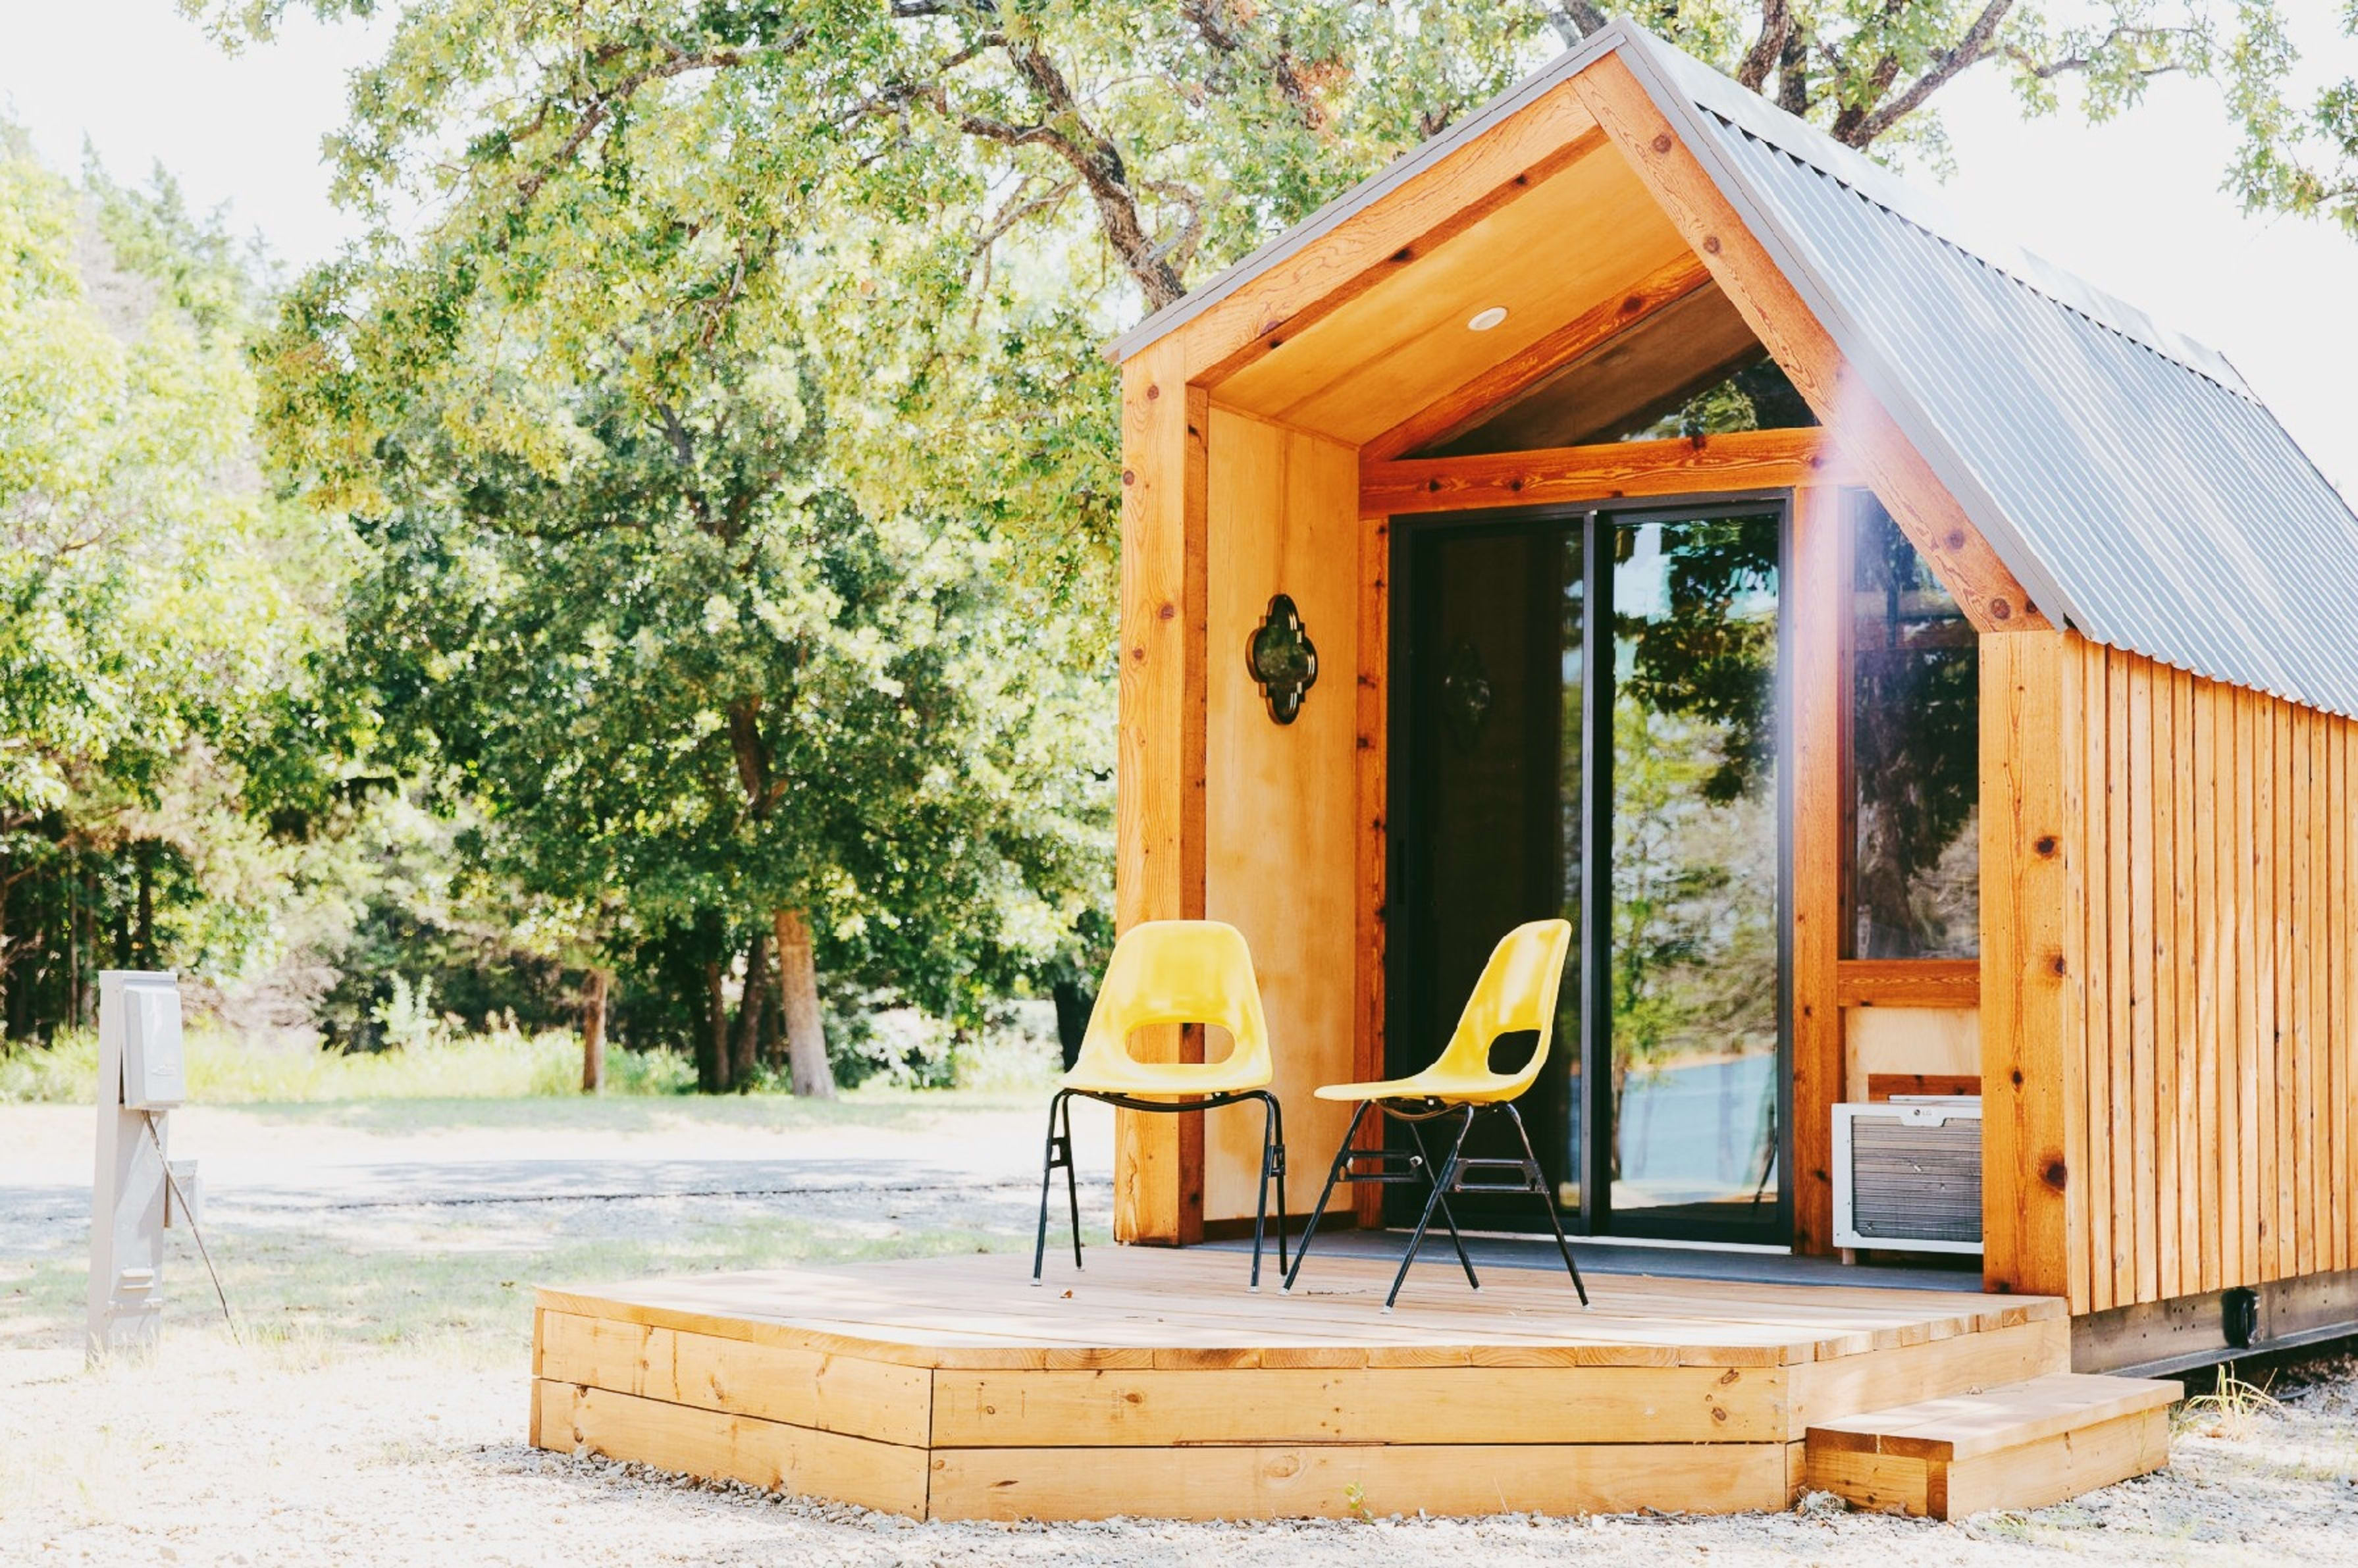 How to Build This Tiny Cabin That Will Pay for Itself